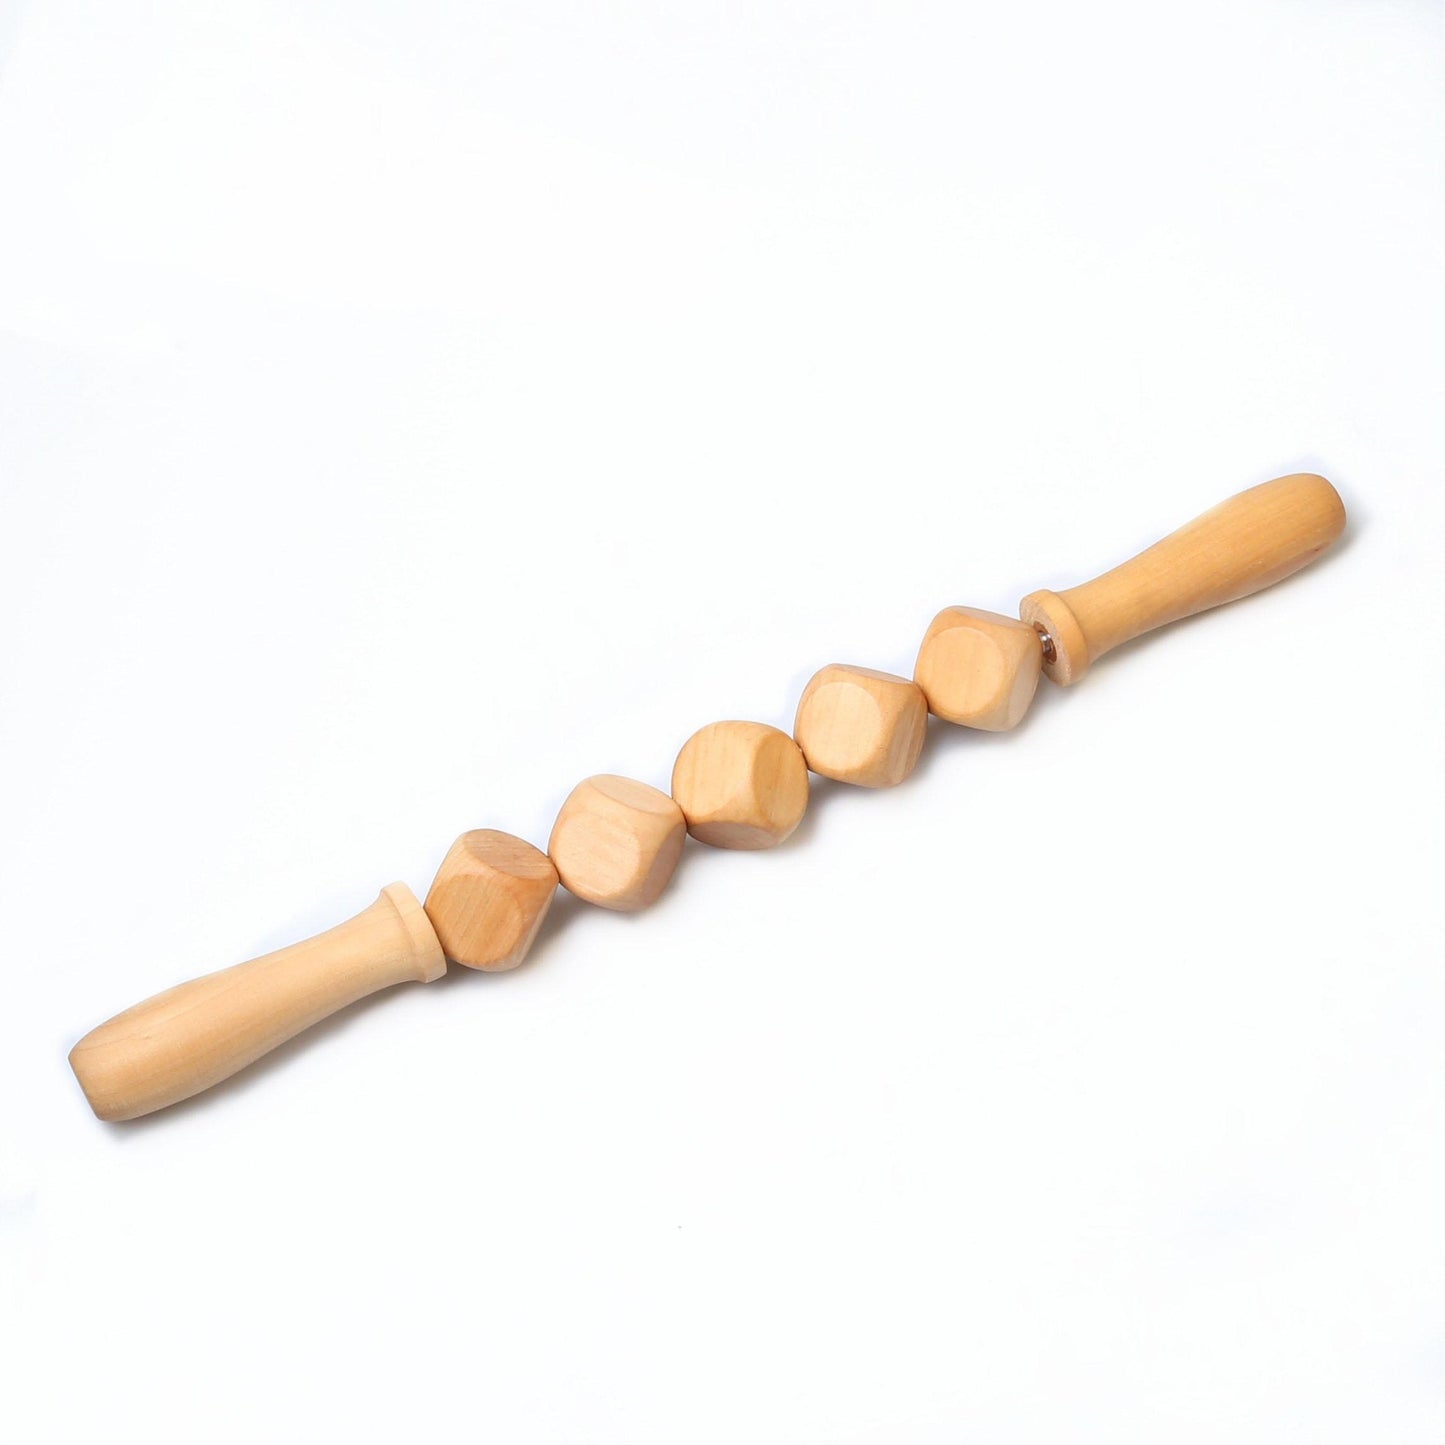 3pcs Wooden Anti-Cellulite Massage Tool Hand Roller